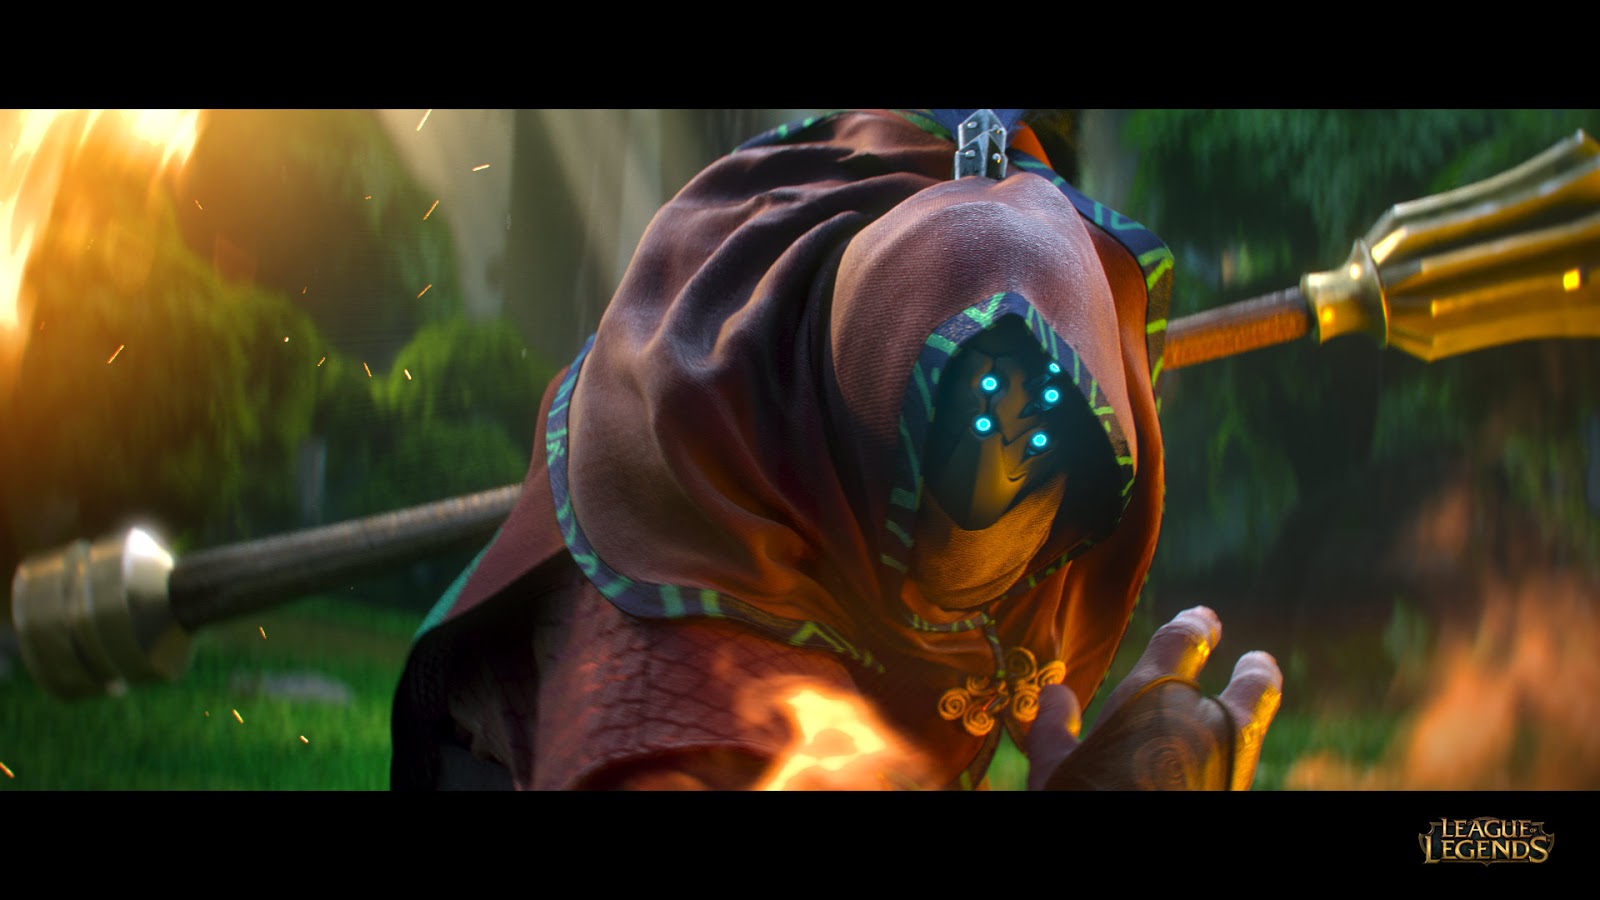 Surrender at 20: League of Legends Cinematic: A New Dawn